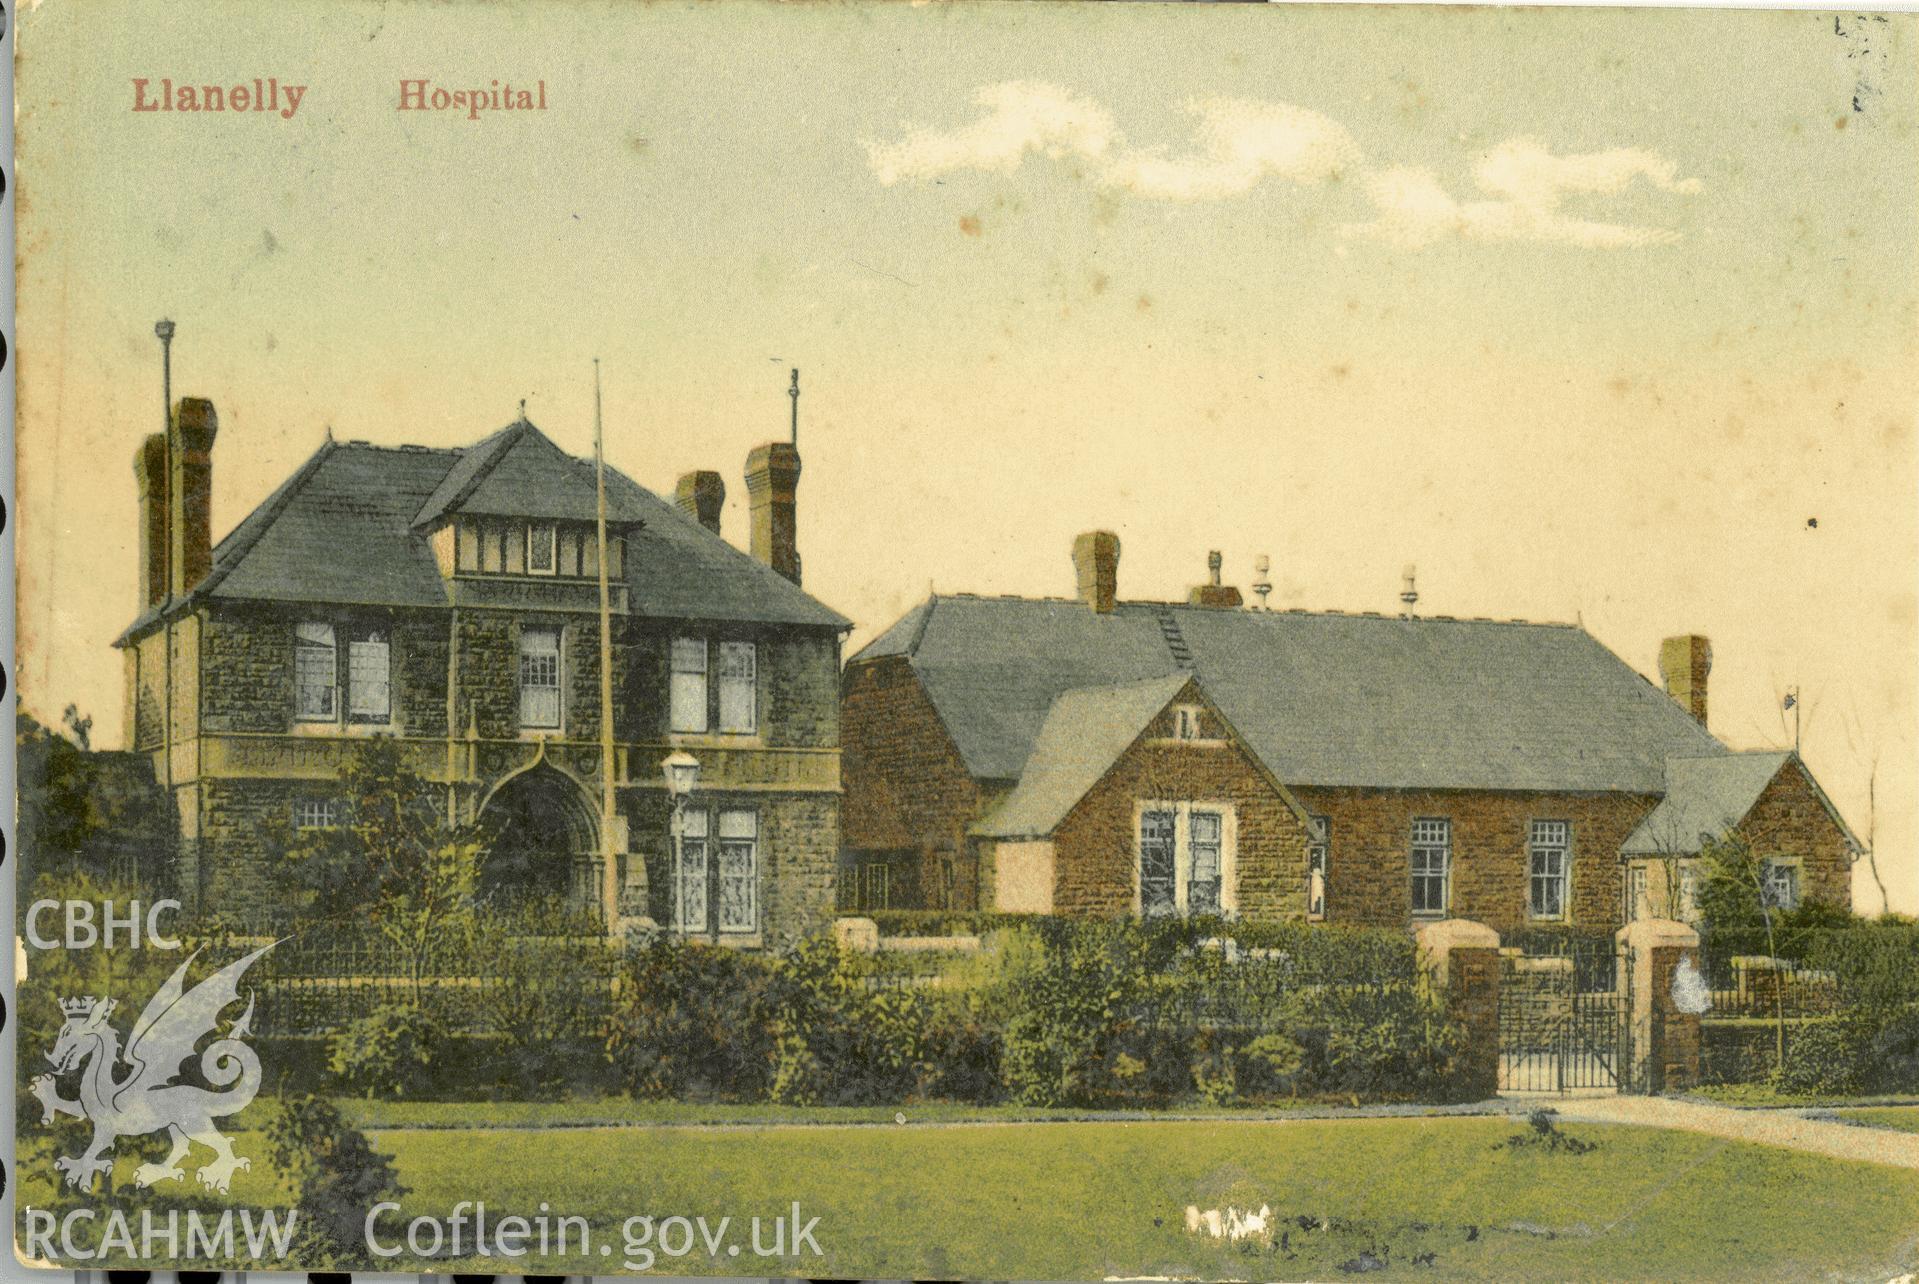 Digitised postcard image of Llanelli Hospital, Max Ettlinger & Co Ltd London. Produced by Parks and Gardens Data Services, from an original item in the Peter Davis Collection at Parks and Gardens UK. We hold only web-resolution images of this collection, suitable for viewing on screen and for research purposes only. We do not hold the original images, or publication quality scans.